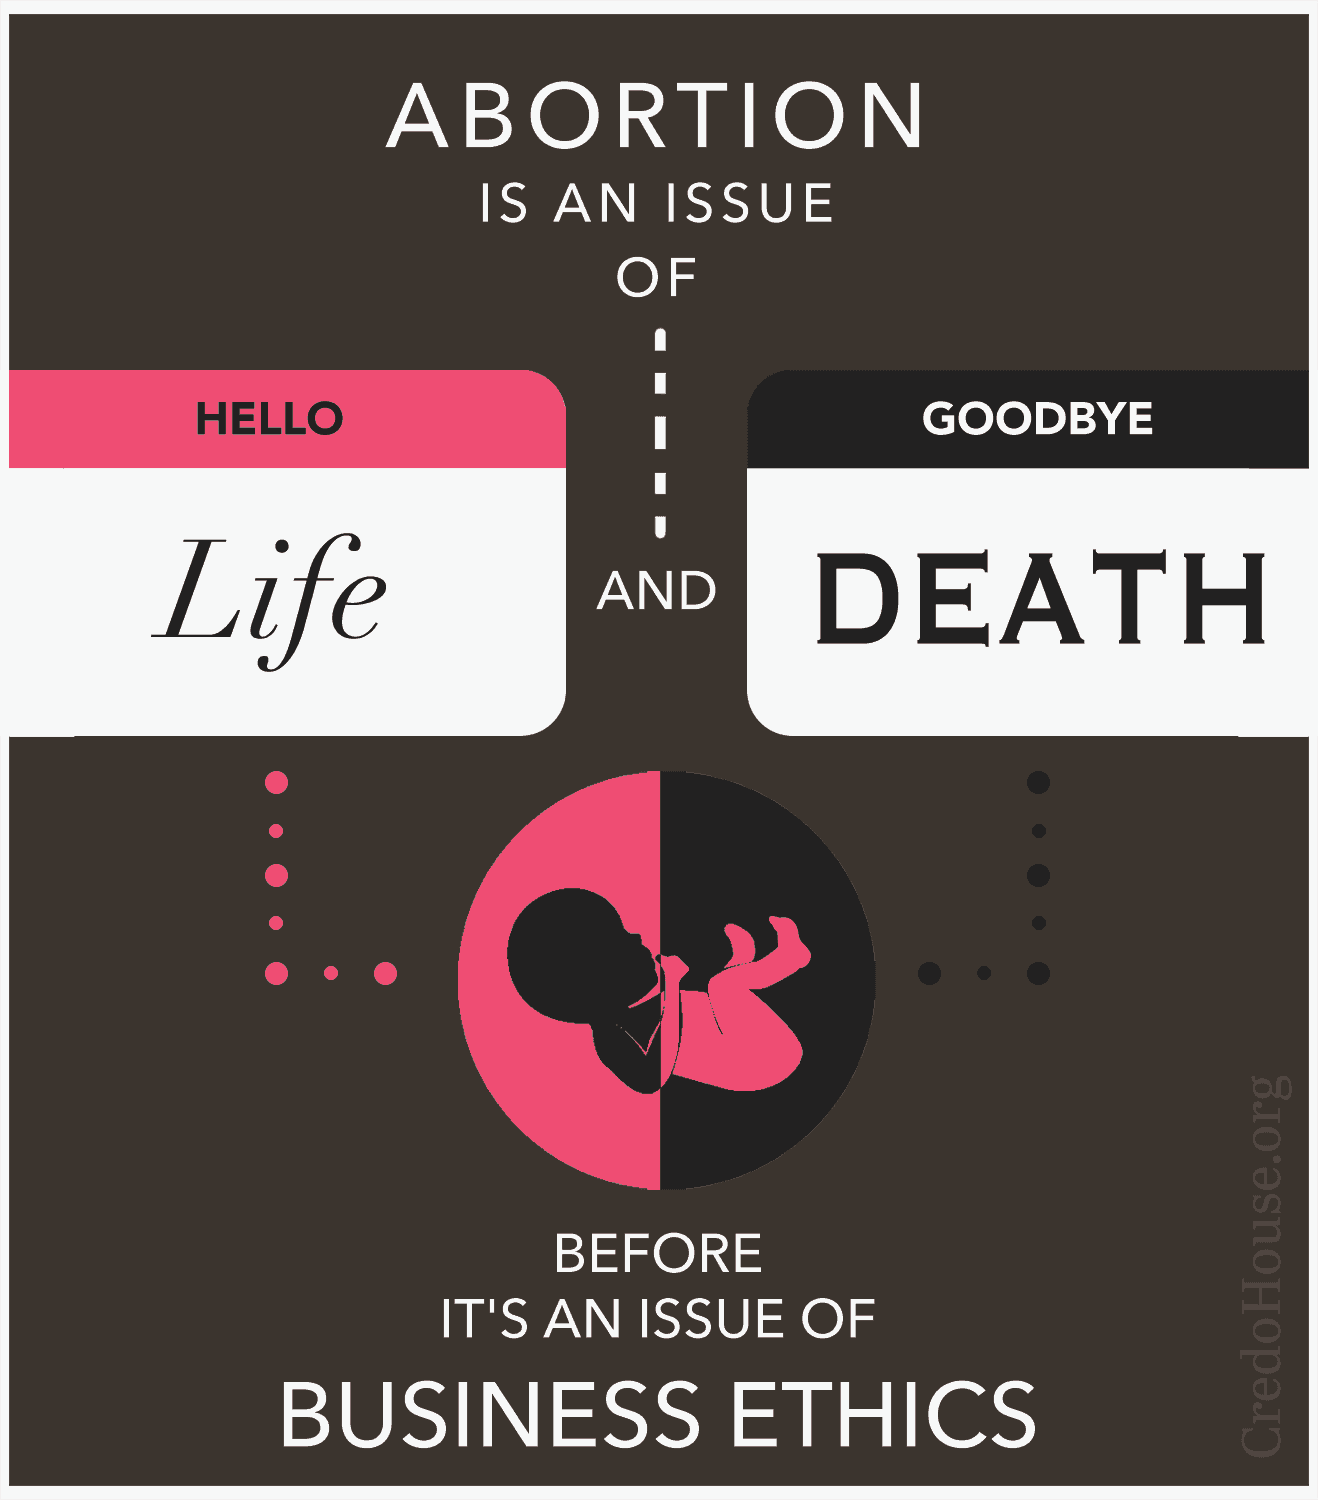 Moral implications abortion